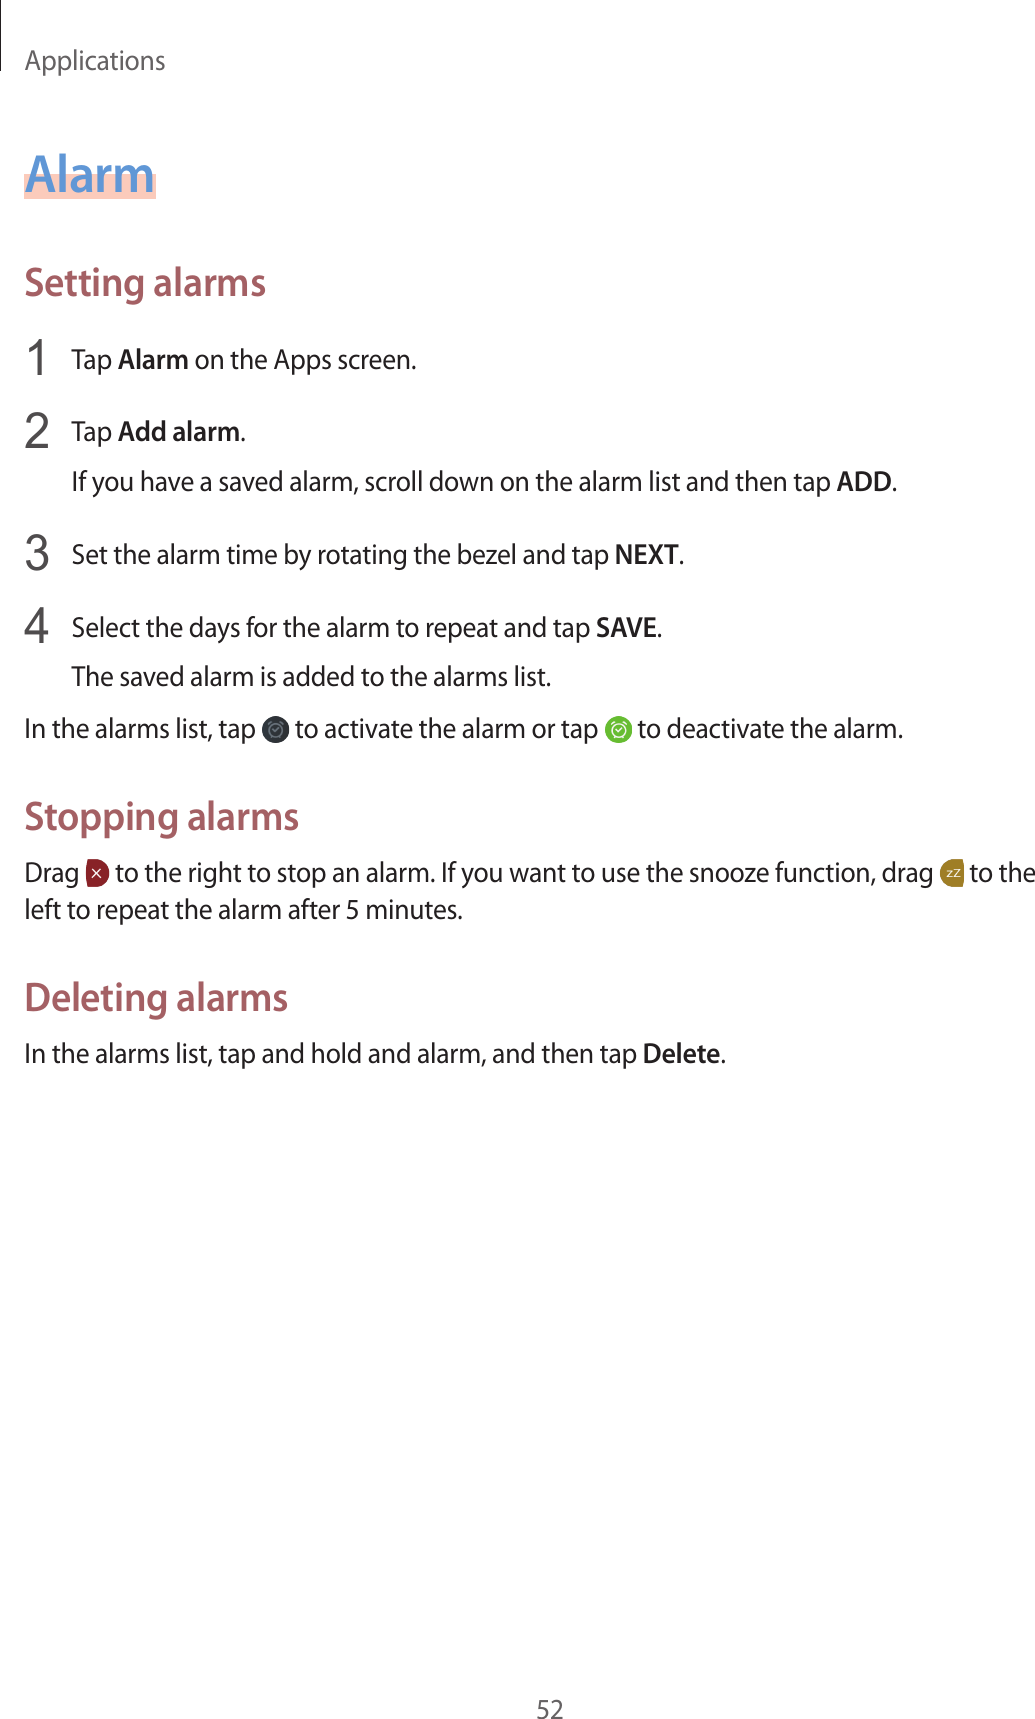 Applications52AlarmSetting alarms1  Tap Alarm on the Apps screen.2  Tap Add alarm.If you have a saved alarm, scroll down on the alarm list and then tap ADD.3  Set the alarm time by rotating the bezel and tap NEXT.4  Select the days for the alarm to repeat and tap SAVE.The saved alarm is added to the alarms list.In the alarms list, tap   to activate the alarm or tap   to deactivate the alarm.Stopping alarmsDrag   to the right to stop an alarm. If you want to use the snooze function, drag   to the left to repeat the alarm after 5 minutes.Deleting alarmsIn the alarms list, tap and hold and alarm, and then tap Delete.